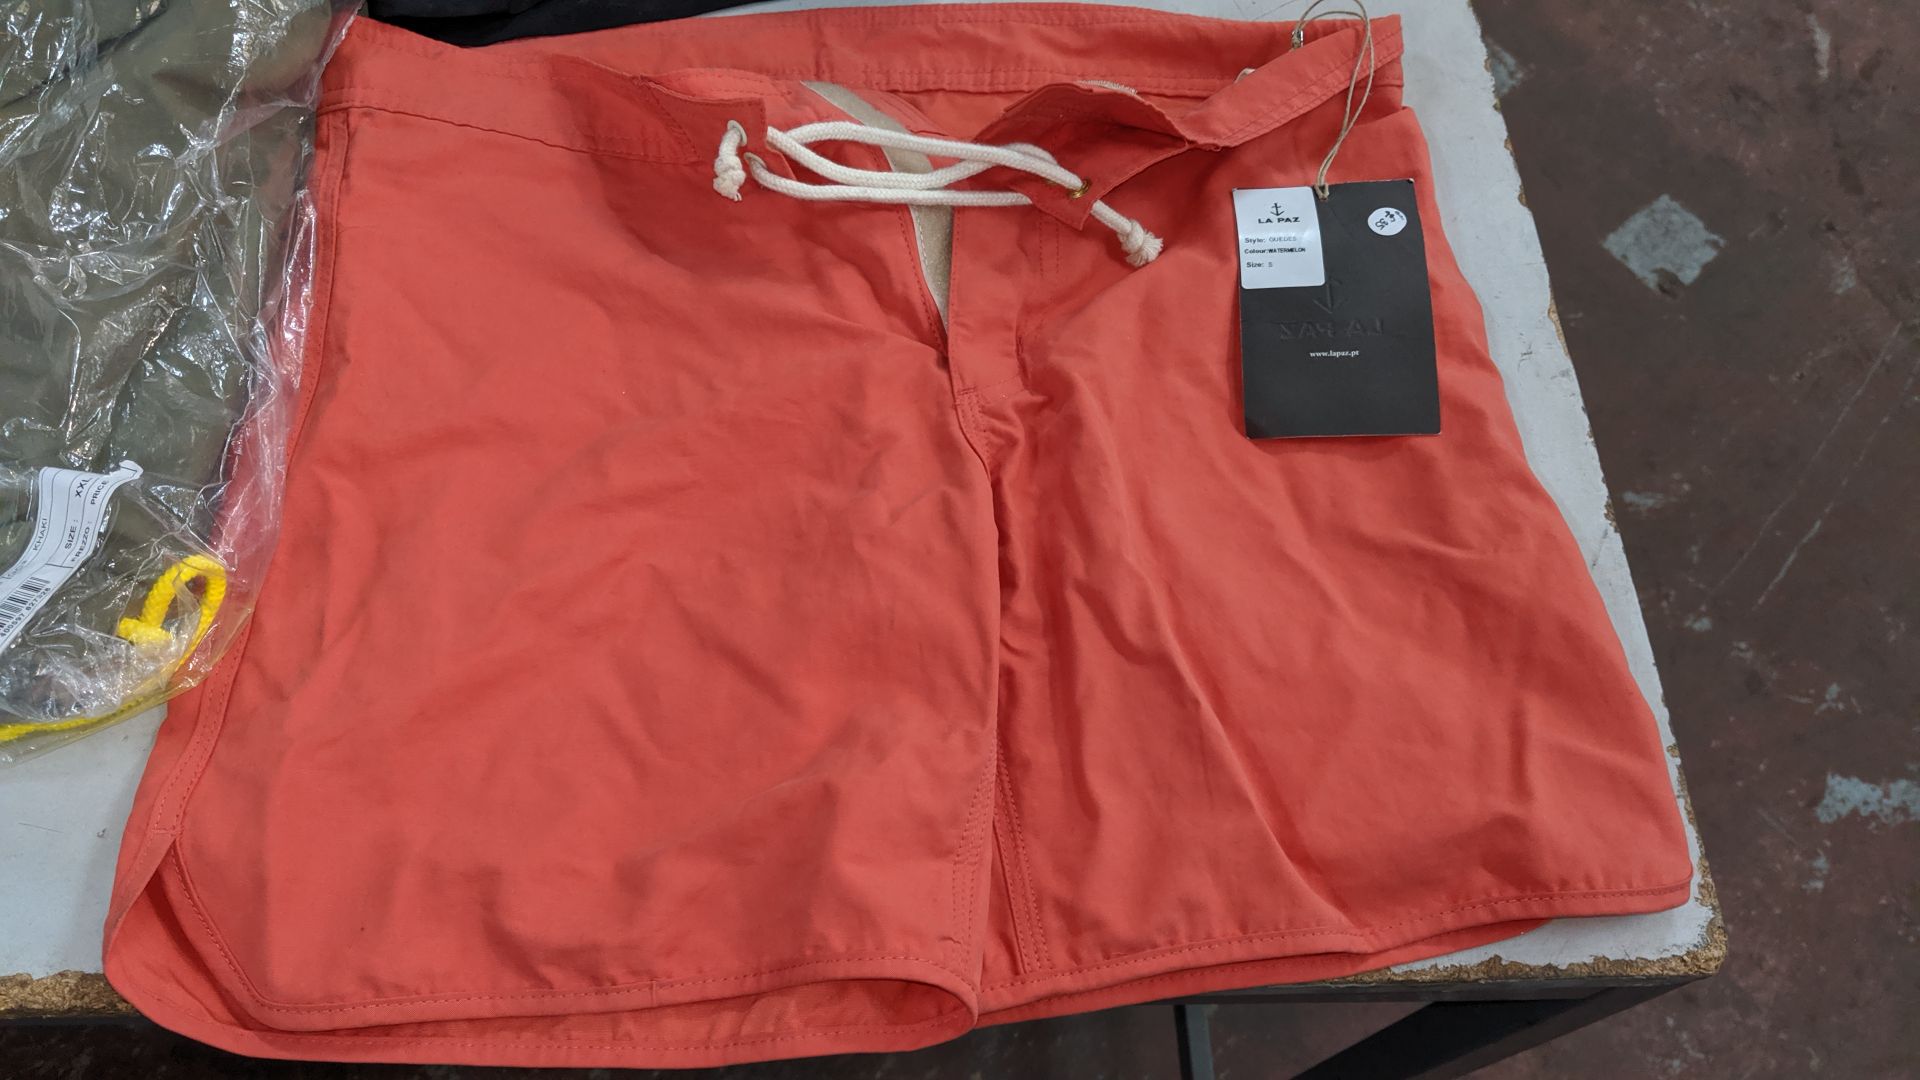 6 off shorts & swim shorts by North Face, Napapijri, Tuk Tuk & others. This is one of a number of - Image 3 of 6